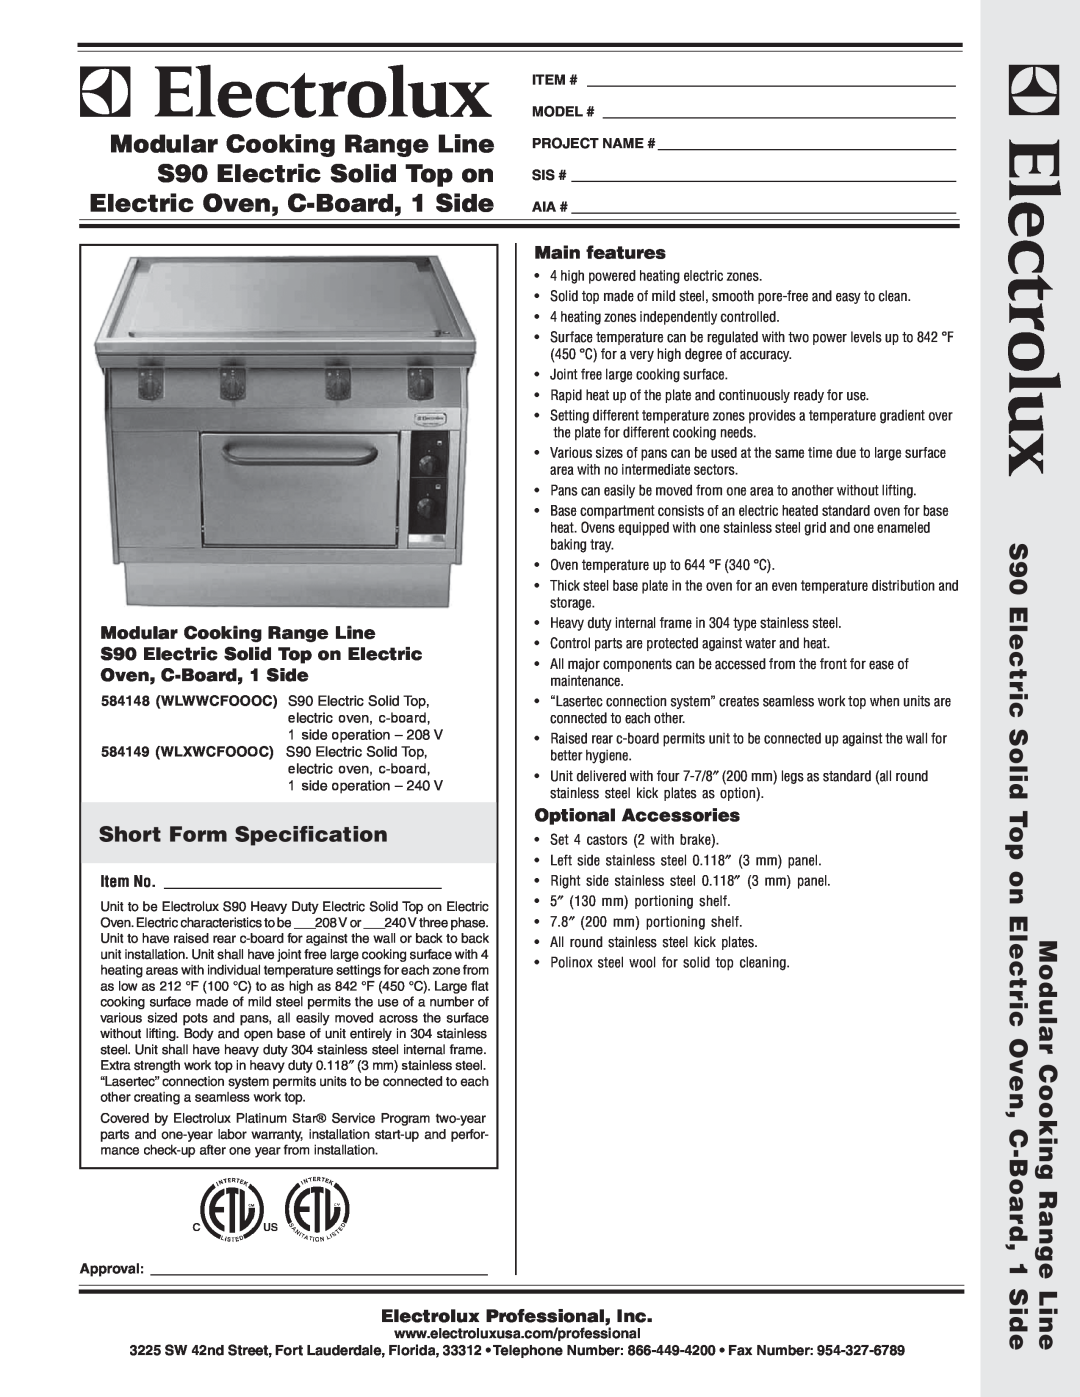 Electrolux WLWWCFOOOC warranty Short Form Specification, Modular Cooking Range Line, Main features, Optional Accessories 